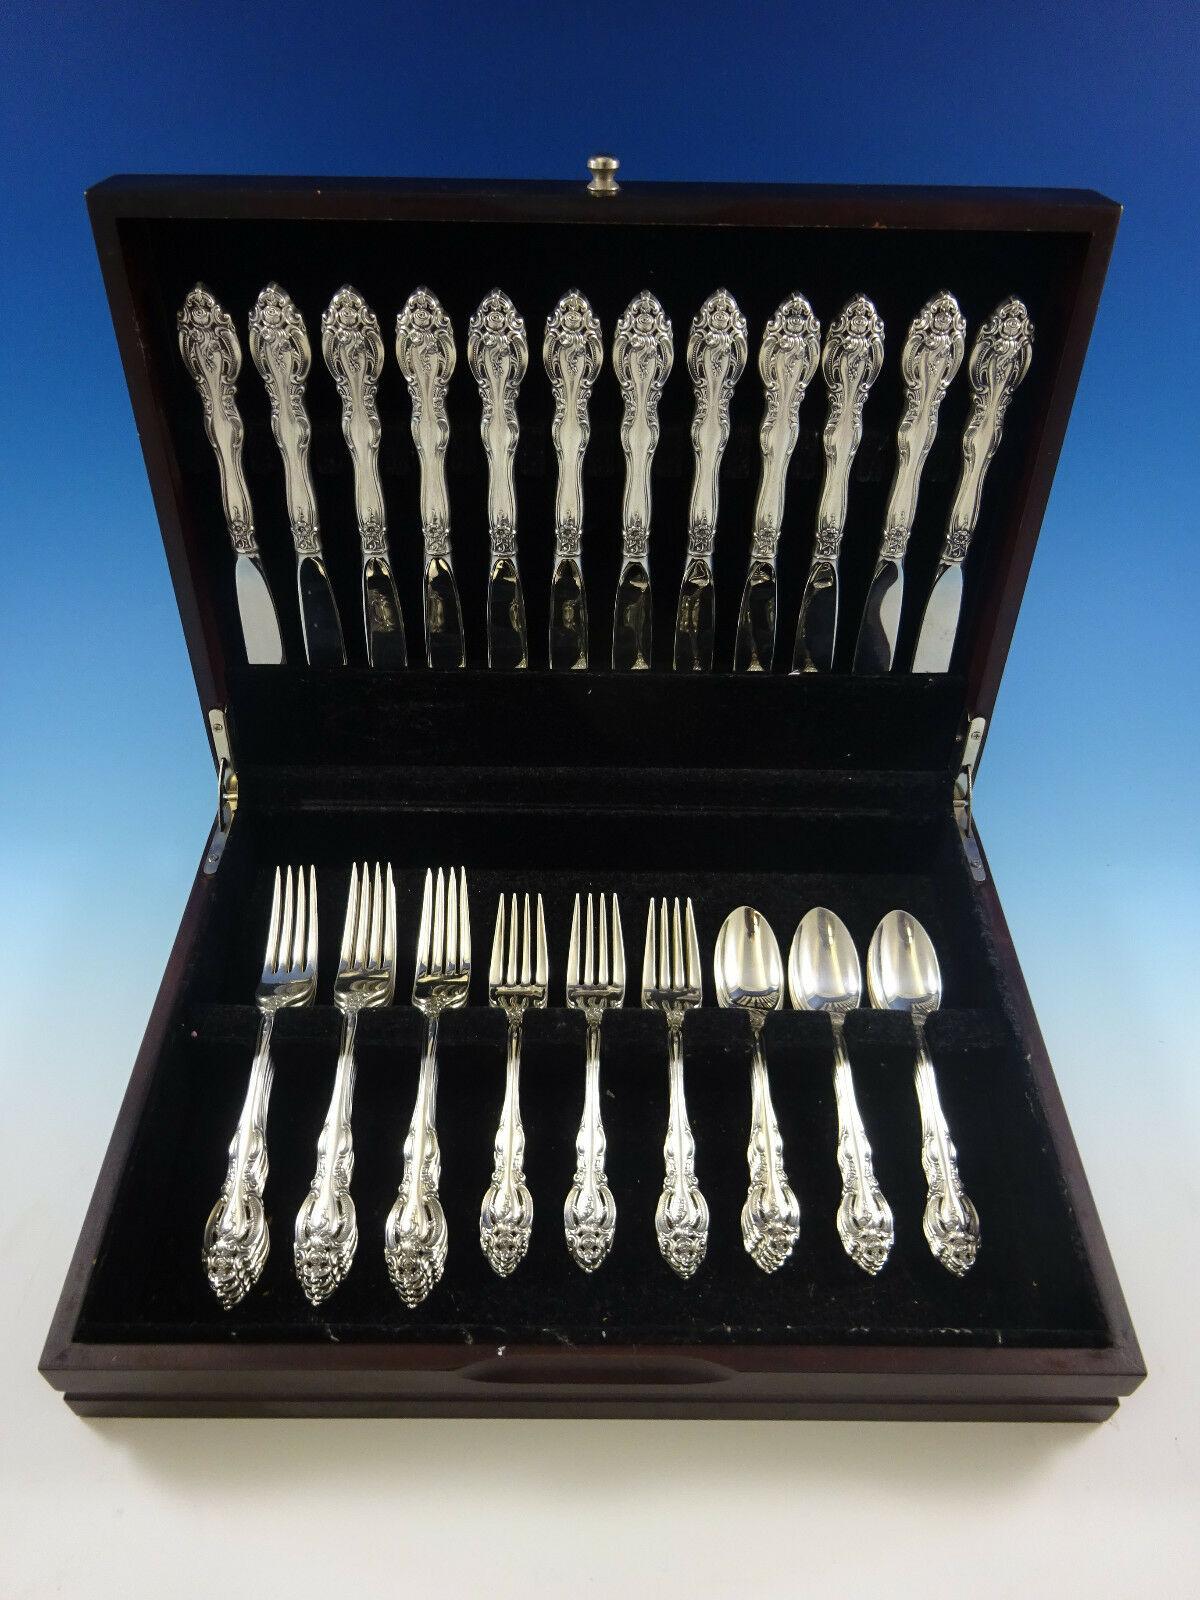 La Scala by Gorham sterling silver flatware set, 48 pieces. This set includes:

12 knives, 9